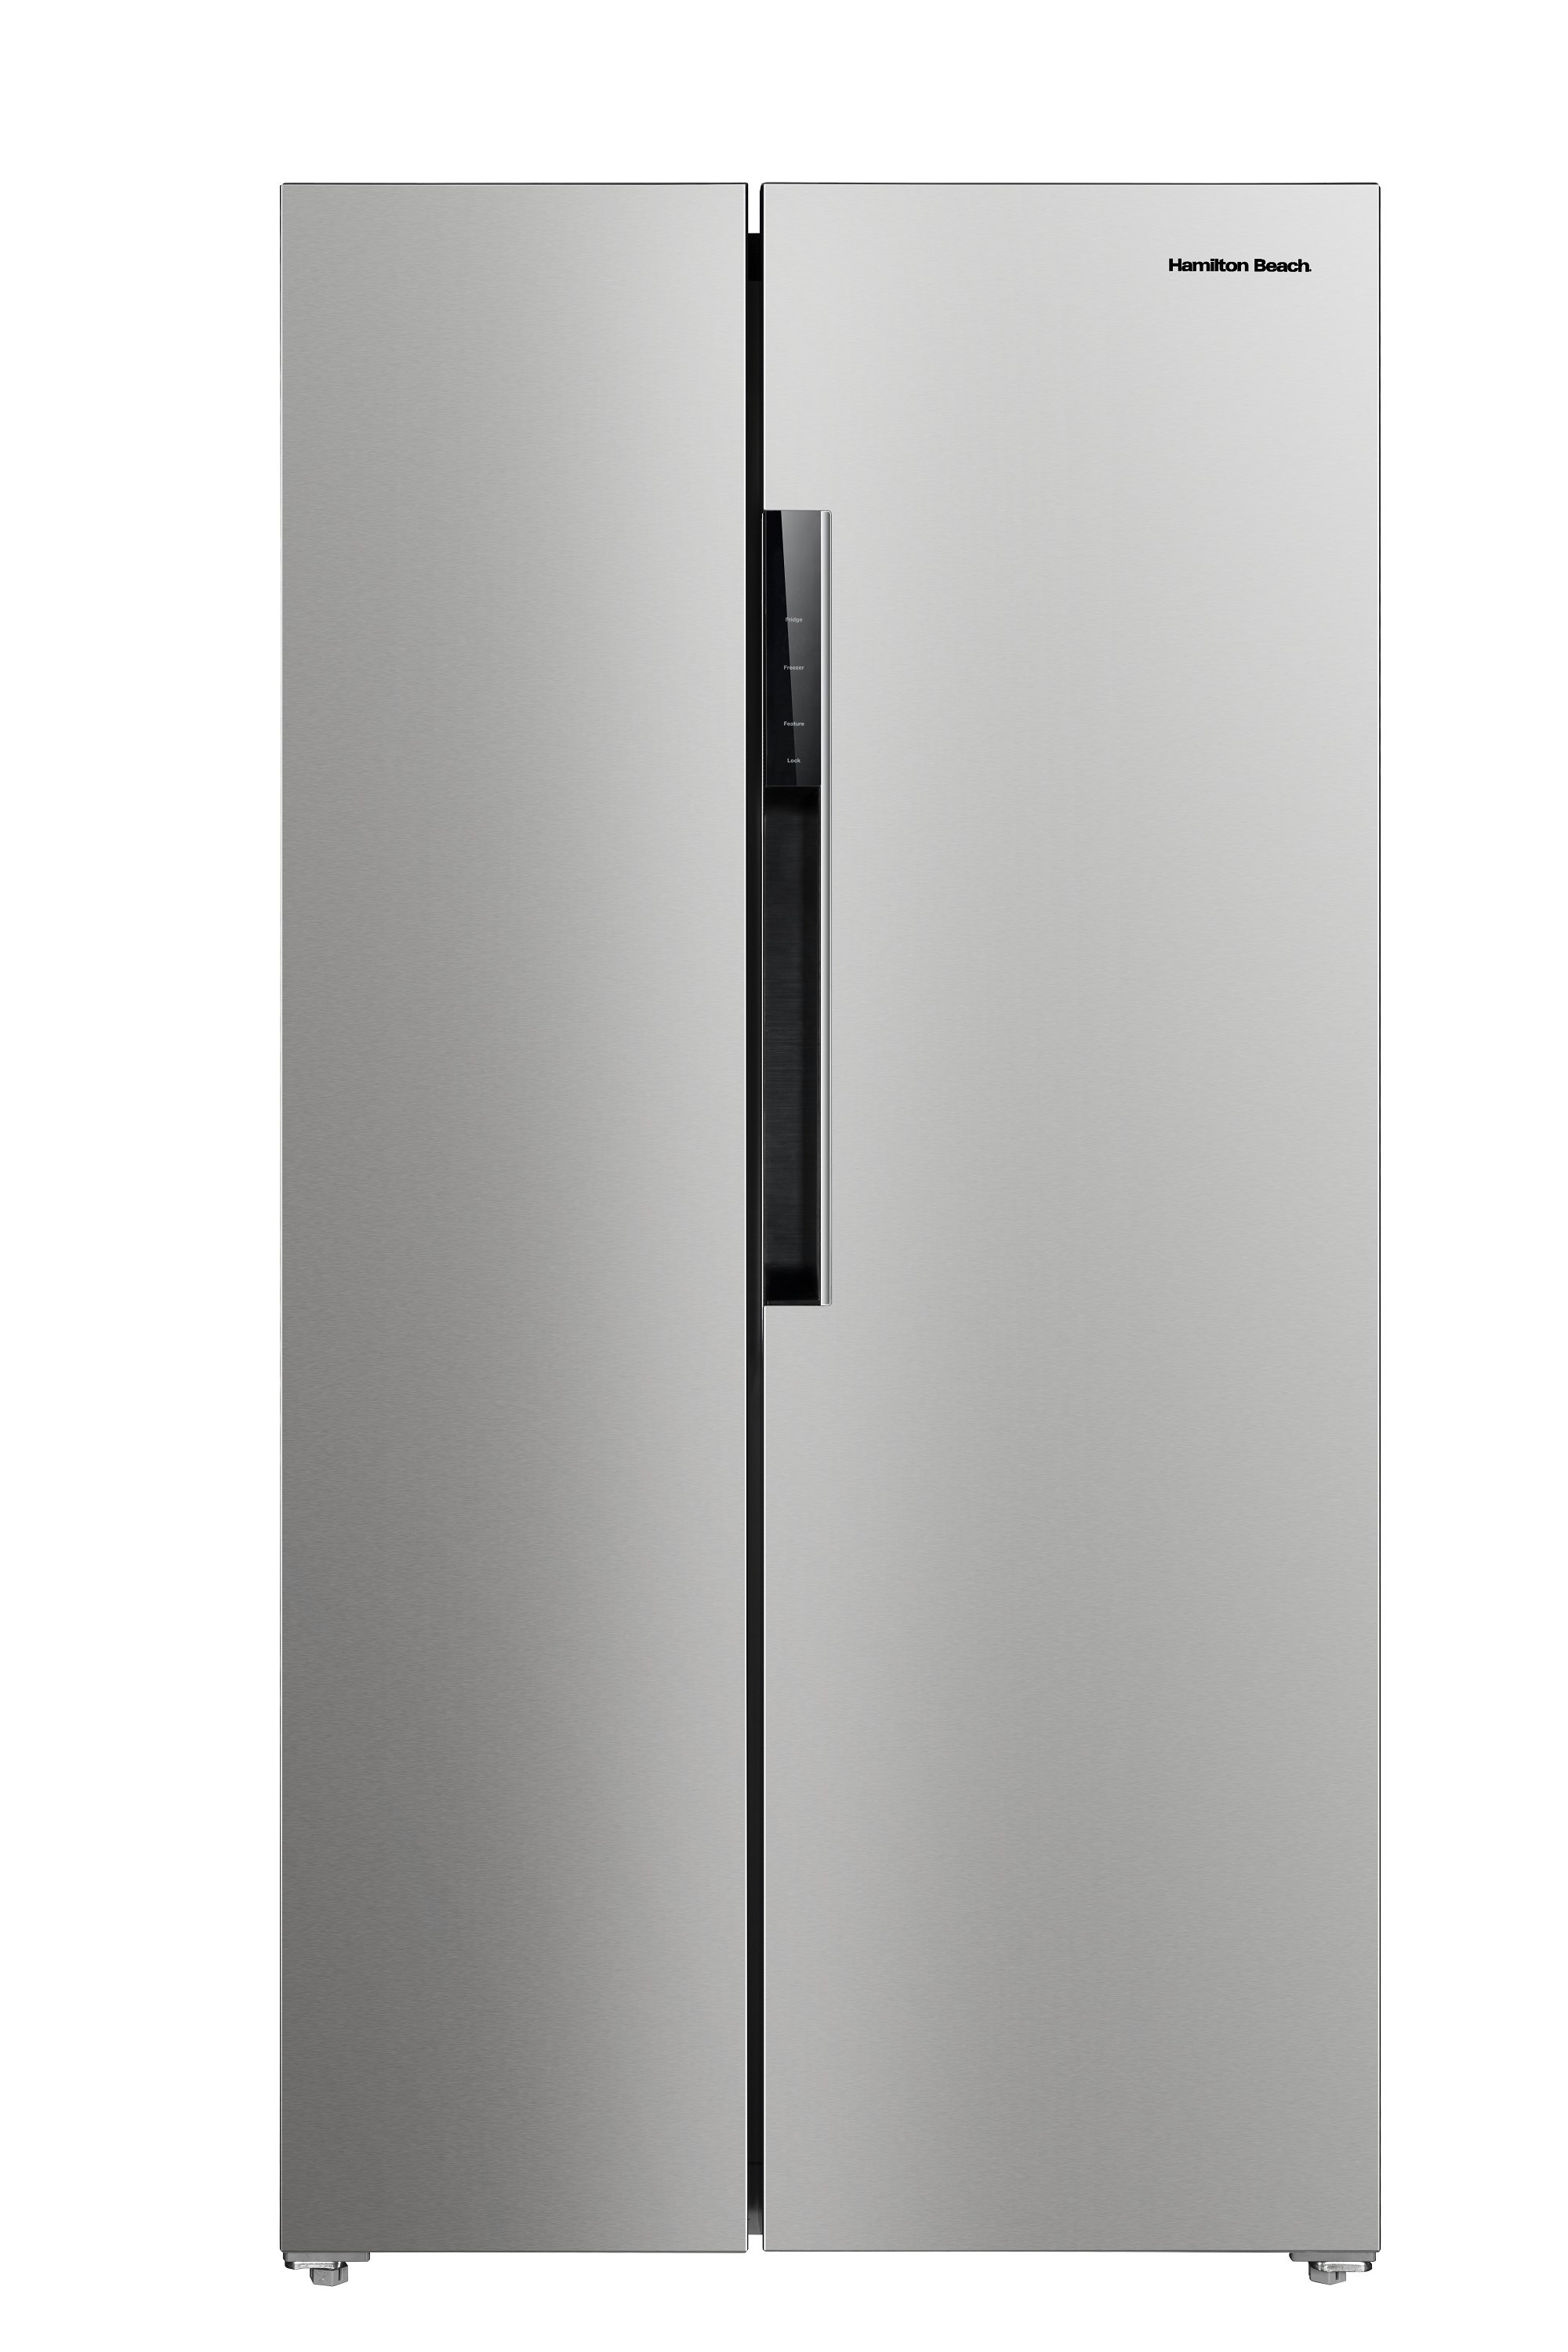 Hamilton Beach 15.6 cu. Ft. Side by side Stainless Refrigerator, Freestanding Installation, HZ8551 - image 1 of 6